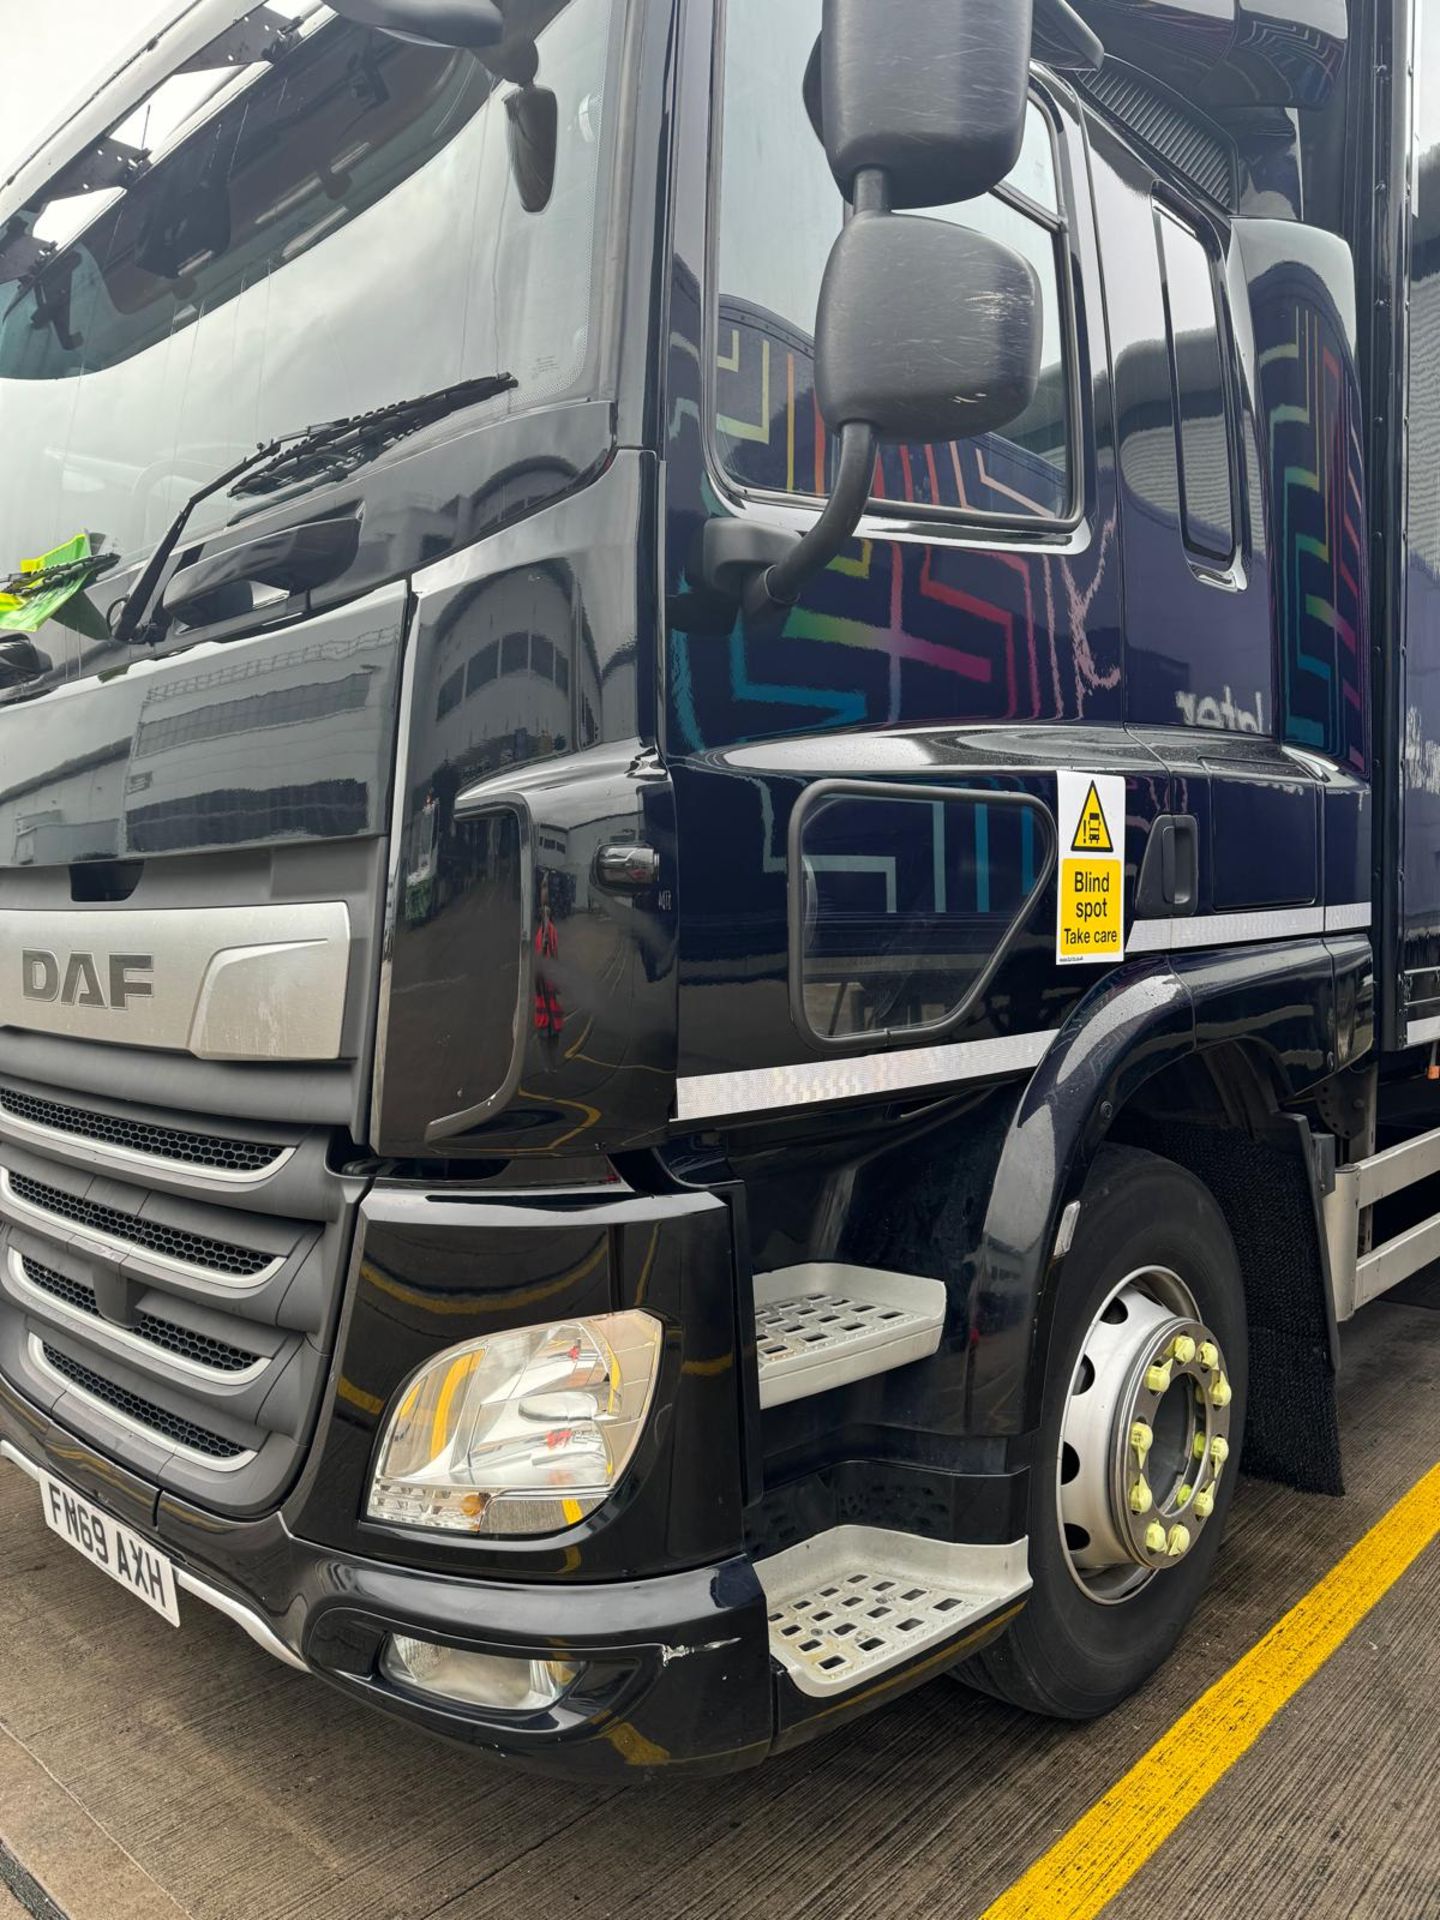 2019, DAF CF 260 FA (Ex-Fleet Owned & Maintained) - FN69 AXH (18 Ton Rigid Truck with Tail Lift) - Image 8 of 22